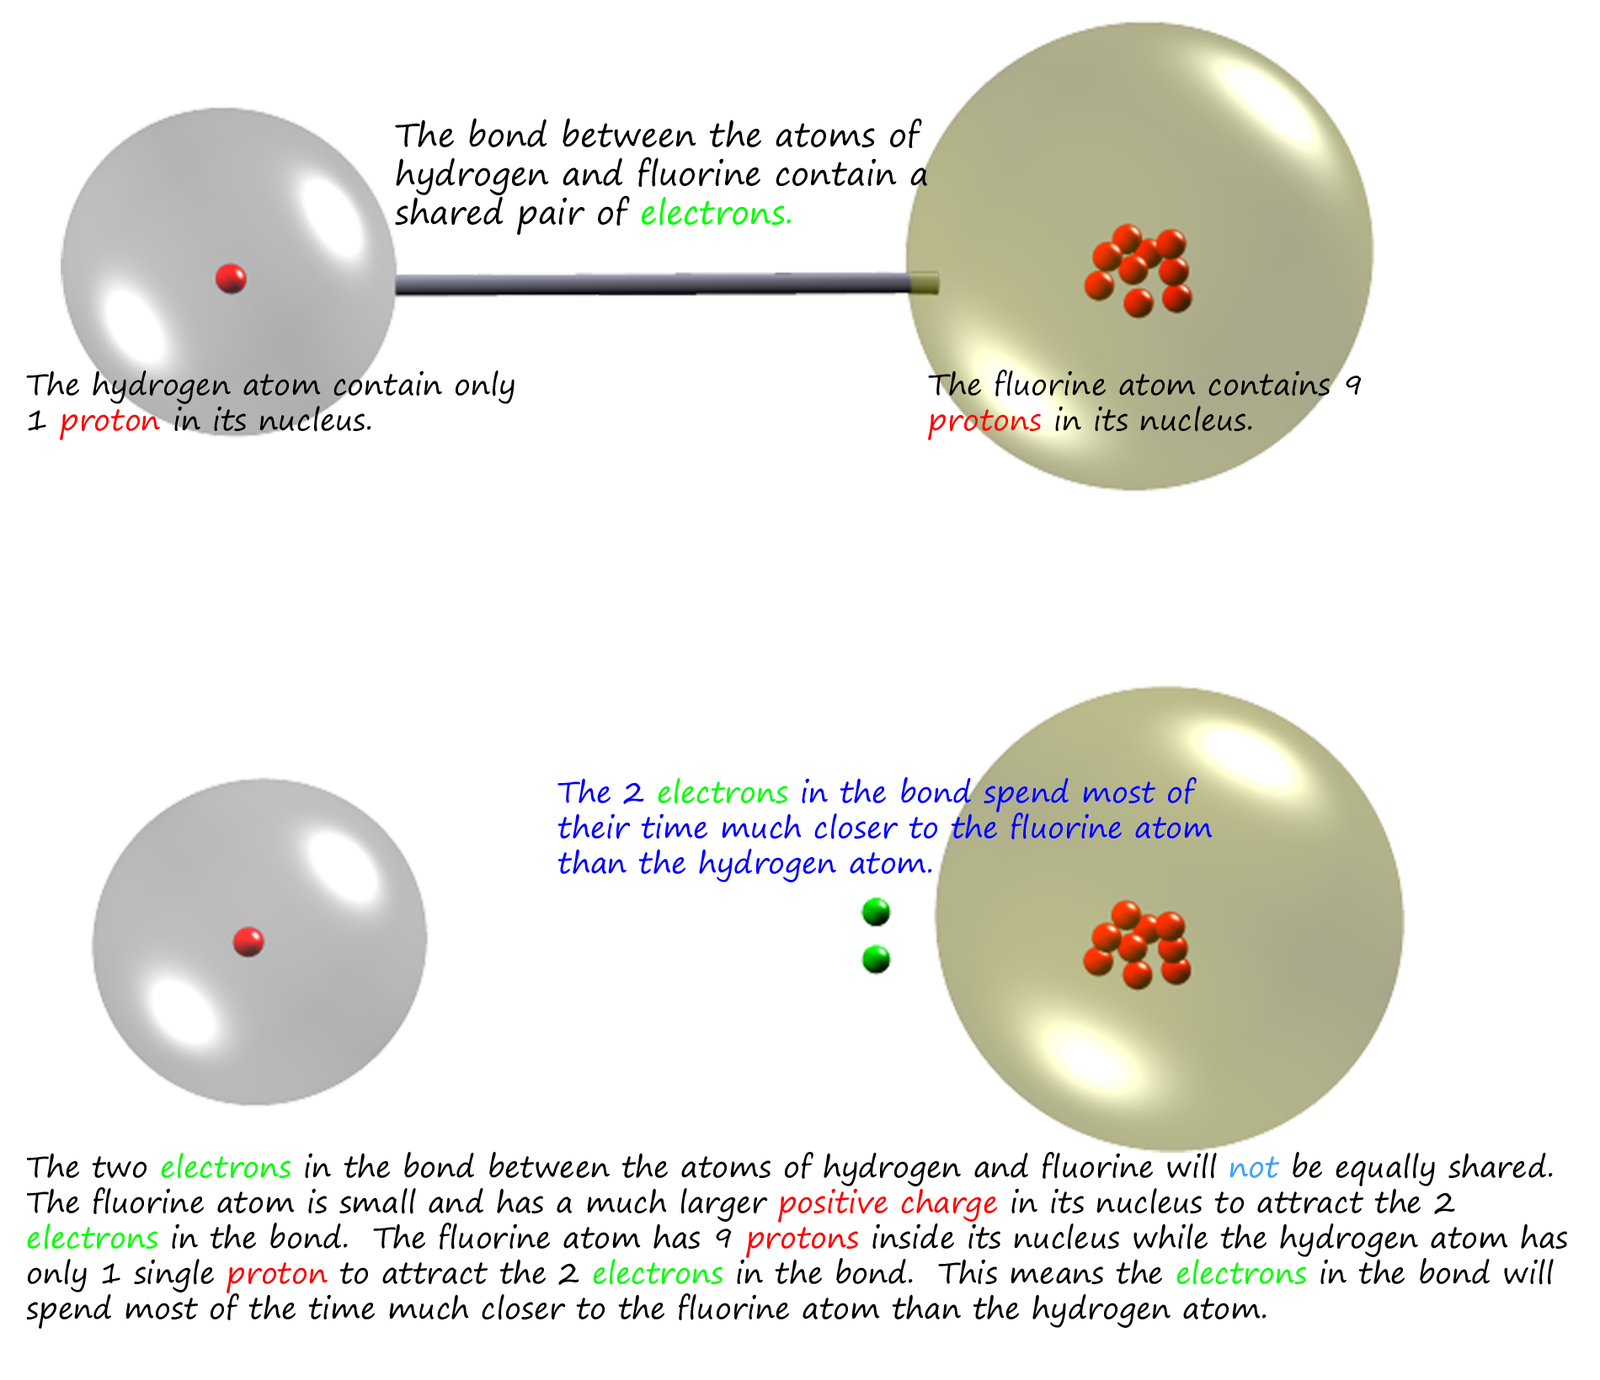 3d model to show the polar covalent bonding in a molecule of hydrogen fluoride that results from differences in the electronegativities of the two atoms.